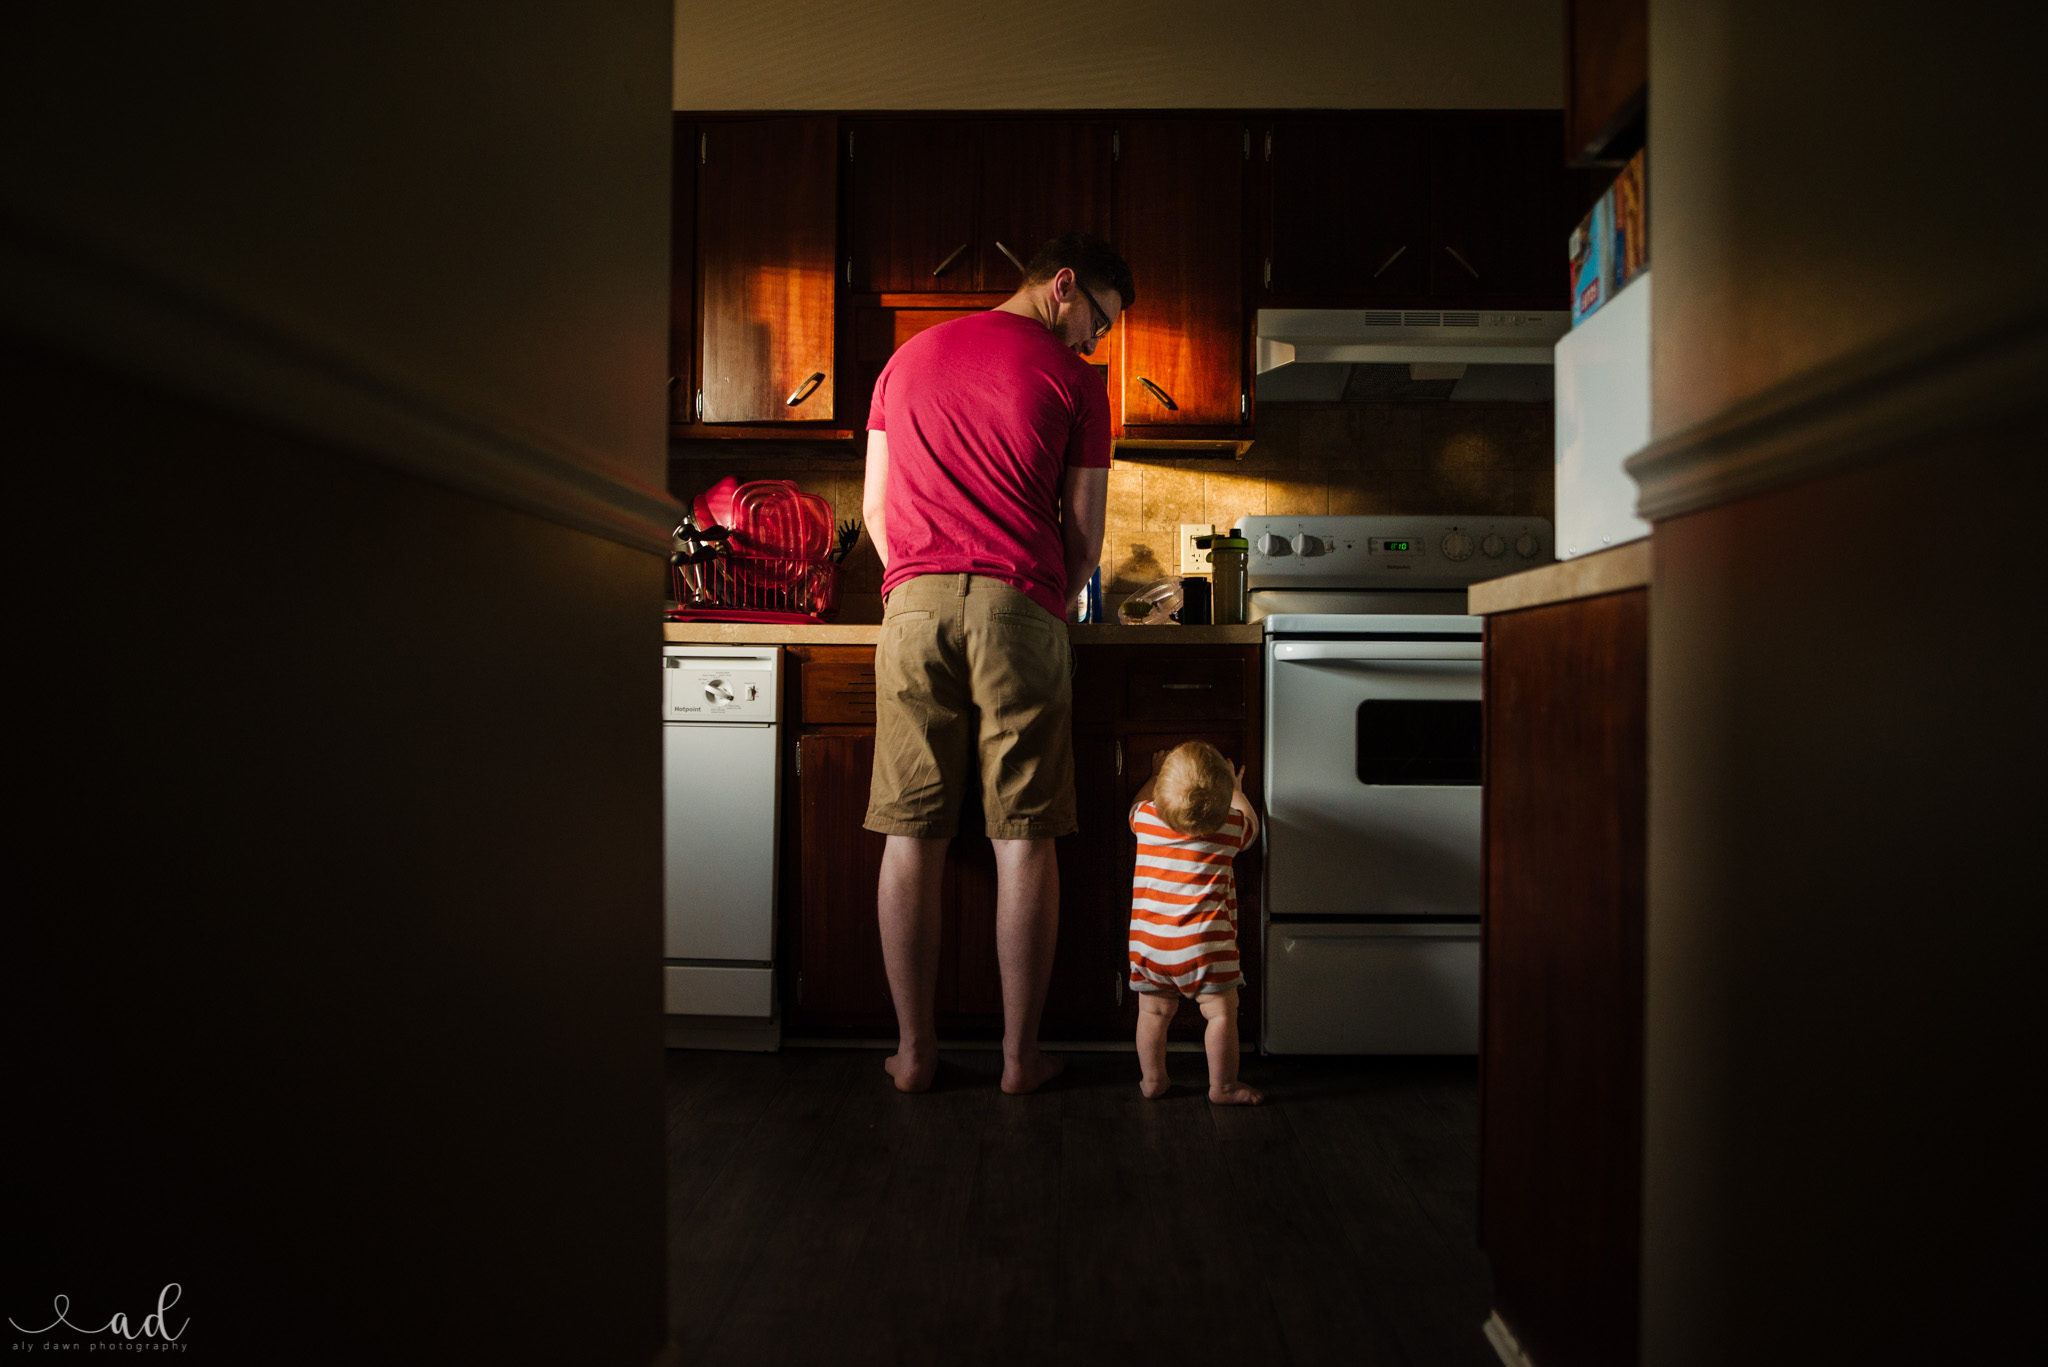 Compositions to Consider when photographing your toddler